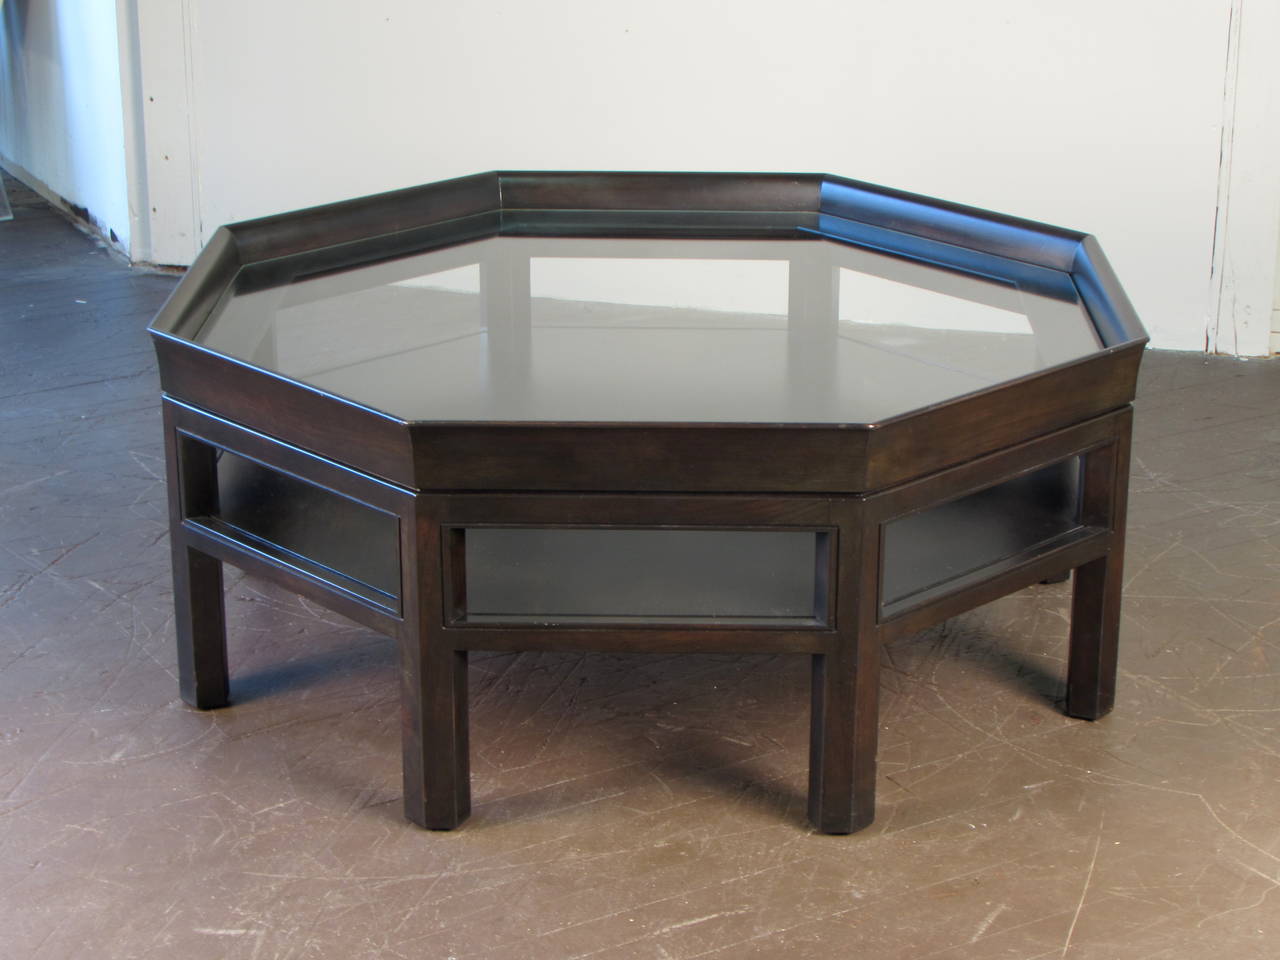 Simple elegant octagonal coffee table by Baker Furniture. Finish is a dark espresso color. Condition is excellent.

We offer free delivery to NYC and Philadelphia area. Delivery to DC, MD, CT, and MA are available if schedule permits please